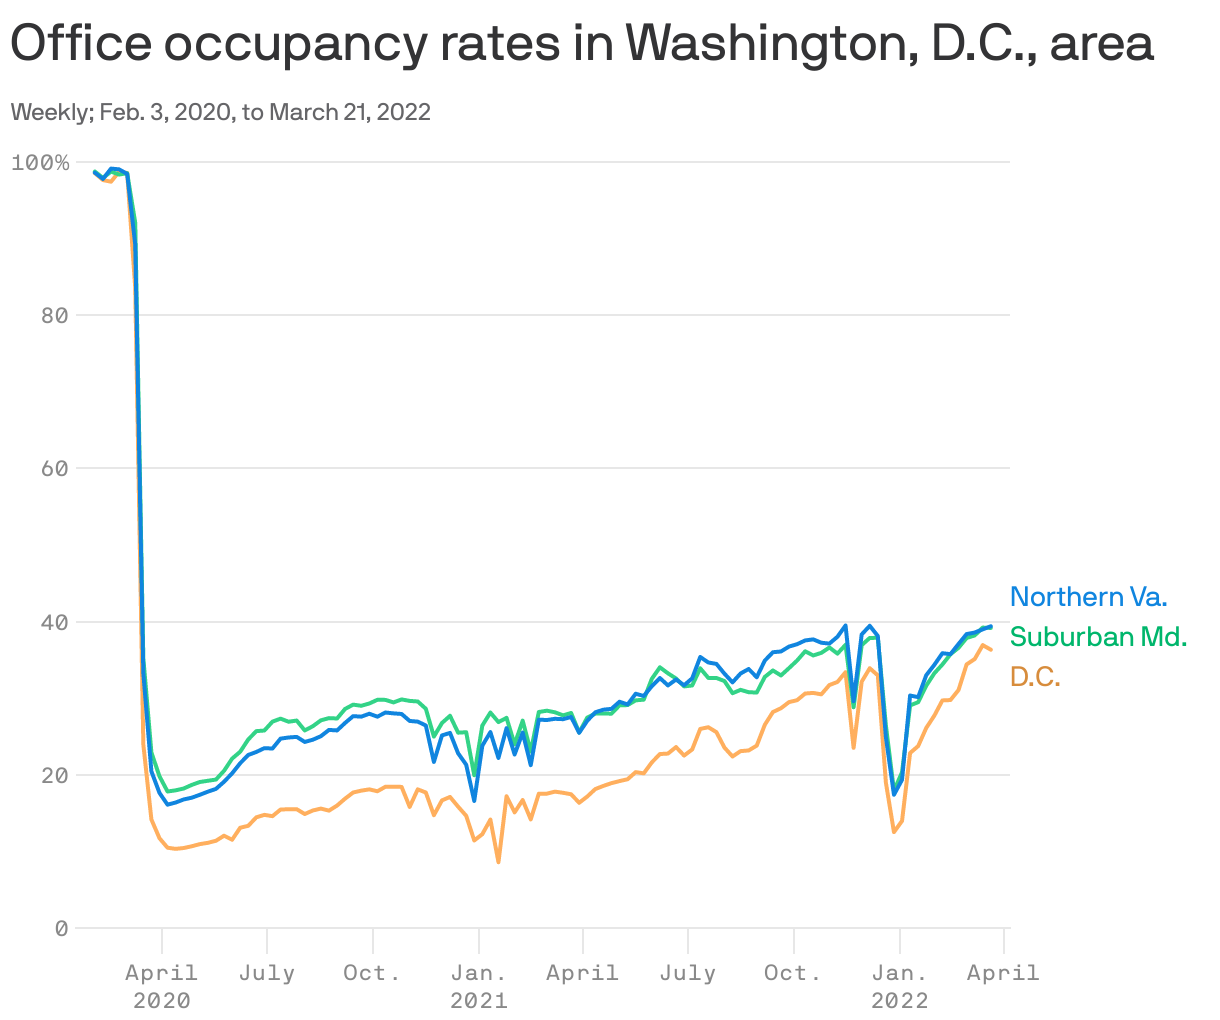 Office occupancy rates in Washington, D.C., area